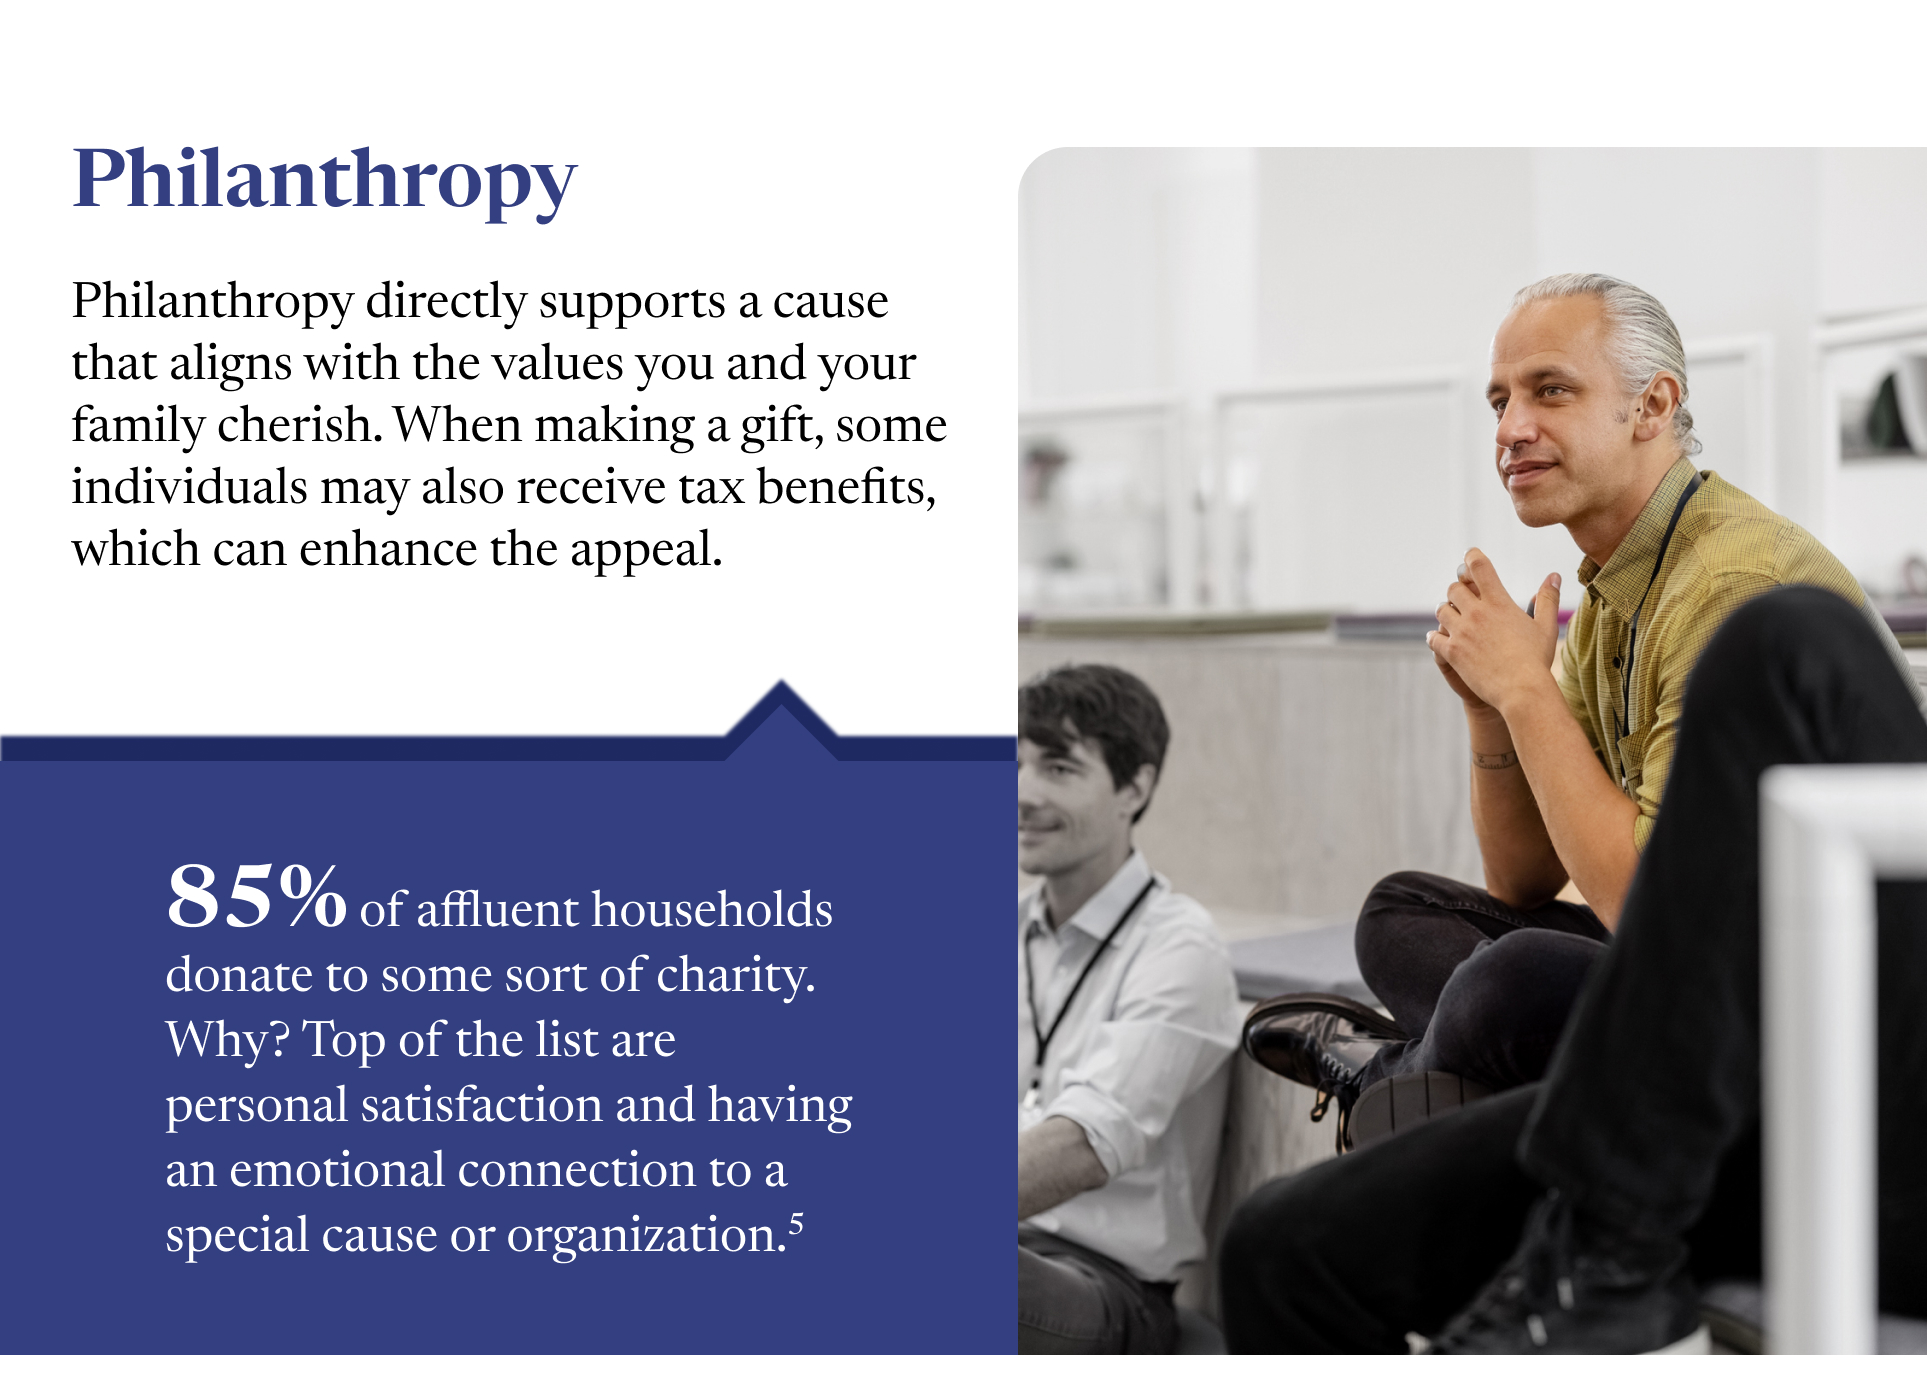 Two paragraphs sit next to an image of a man with steepled fingers and crossed legs staring into the distance. The paragraphs read thusly: Philanthropy directly supports a cause that aligns with the values you and your family cherish. When making a gift, some individuals may also receive tax benefits, which can enhance the appeal. 85% of affluent households donate to some sort of charity. Why? Top of the list are personal satisfaction and having an emotional connection to a special cause or organization.